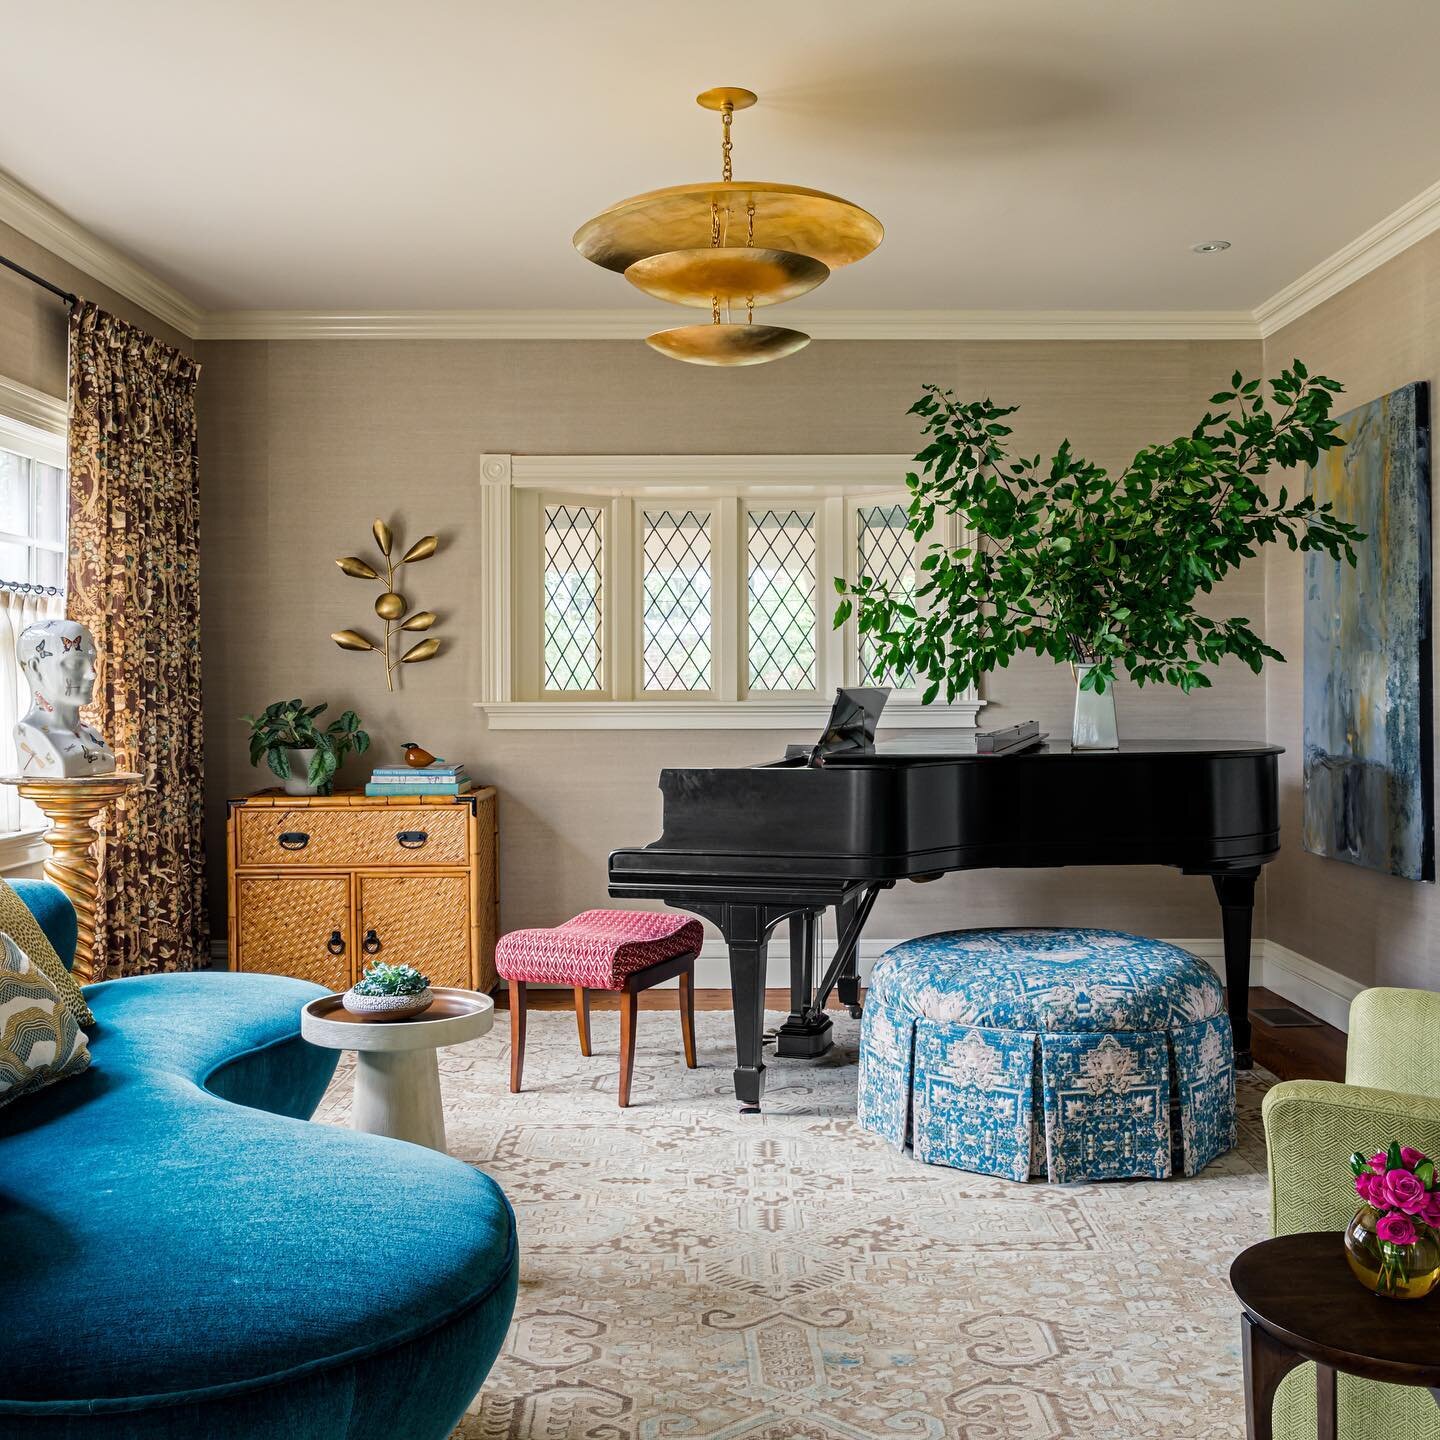 Though a music room was relatively commonplace in plenty of 19th-century homes, most have since been transformed into a home office or fitness space. Here, however, Austin created a music room where there hadn't been one. &quot;The clients are a succ